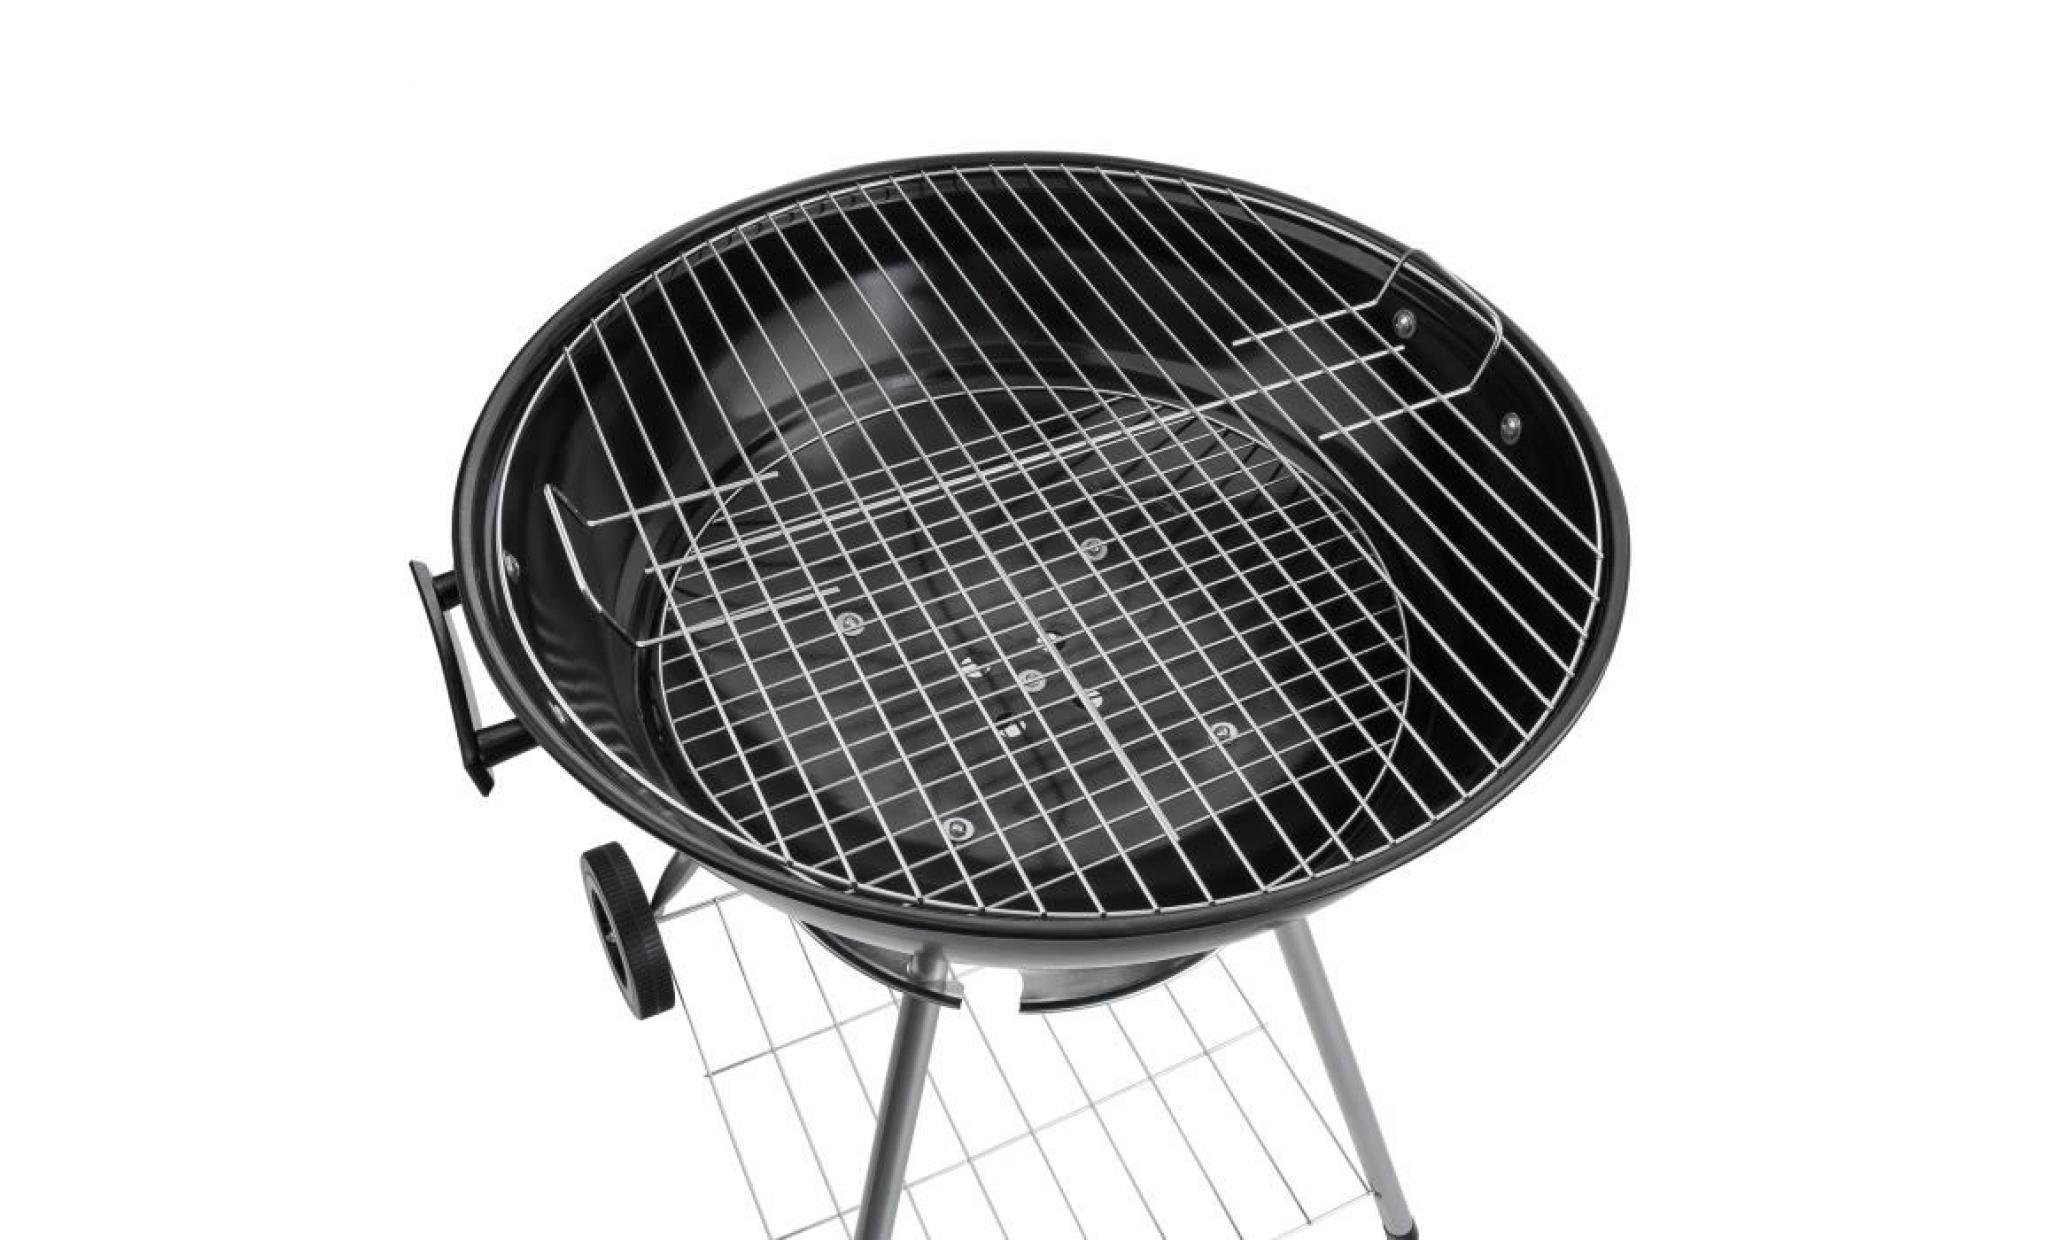 arebos barbecue boule barbecue grille bbq rond mobile acier inoxydable 57 cm pas cher